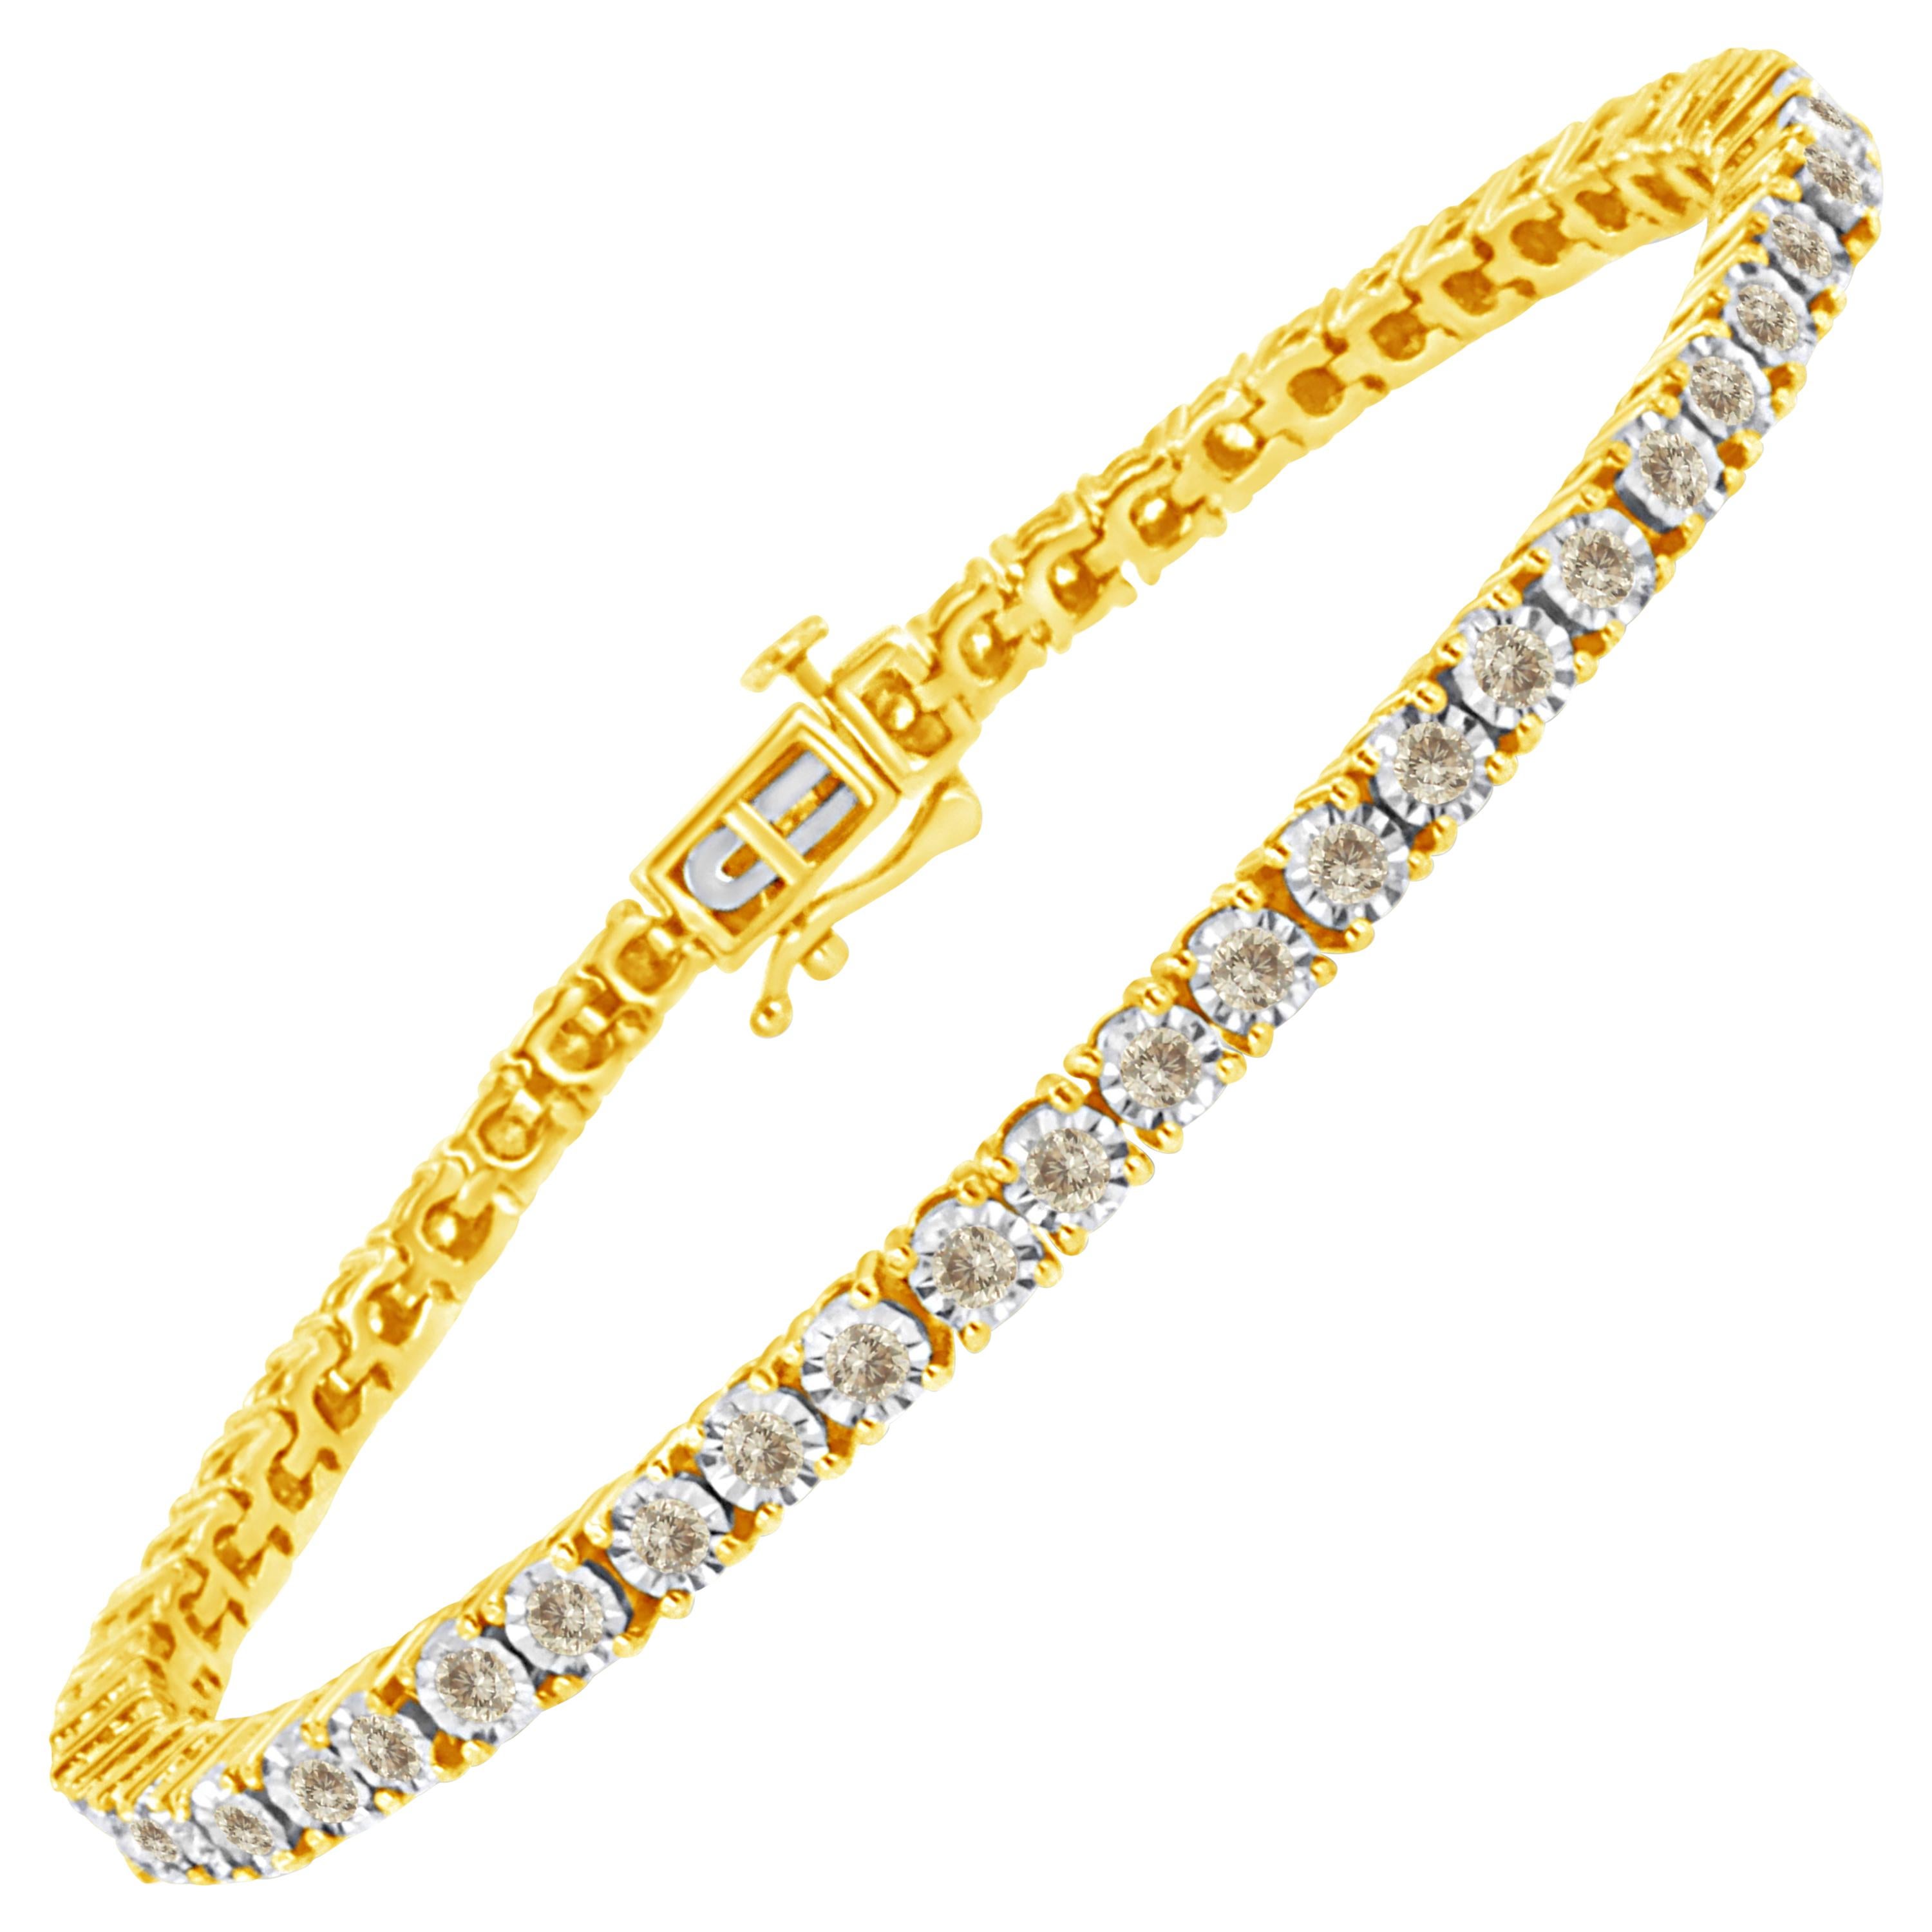 14K Yellow Gold Plated .925 Sterling Silver 3.0 Carat Diamond Tennis Bracelet For Sale